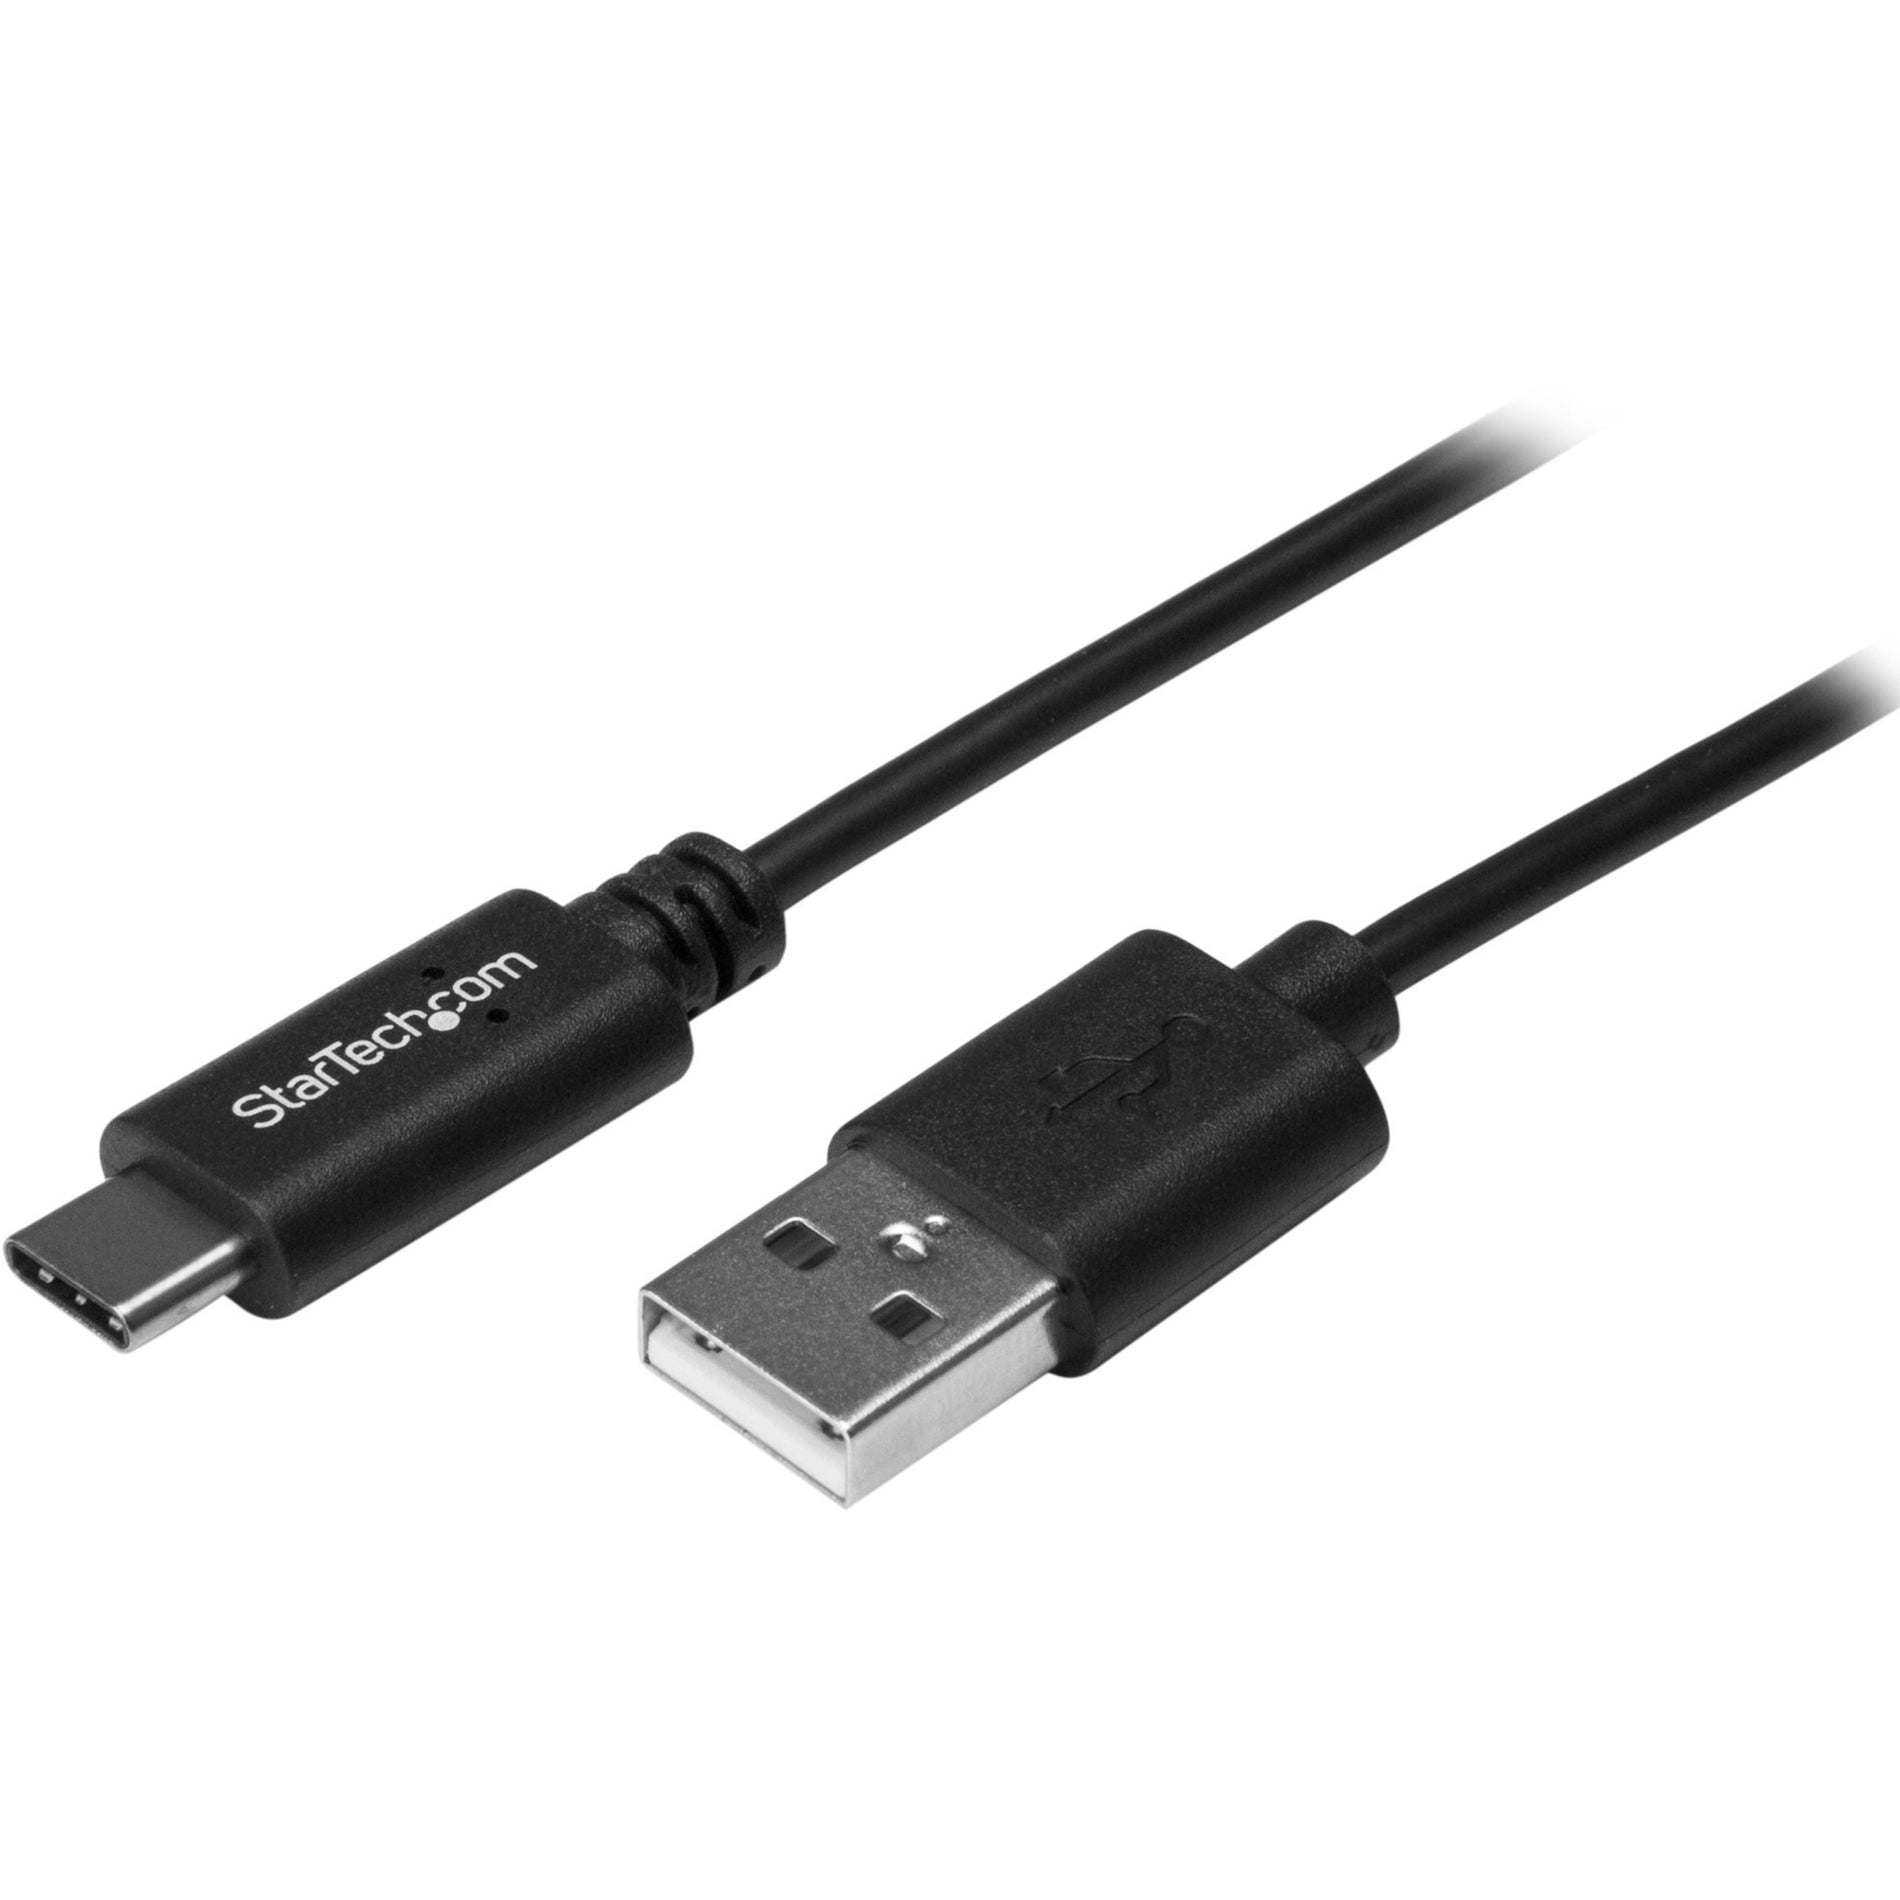 StarTech.com USB2AC4M Sync/Charge USB Data Transfer Cable, Reversible, 13.12 ft, Nickel Plated, 480 Mbit/s